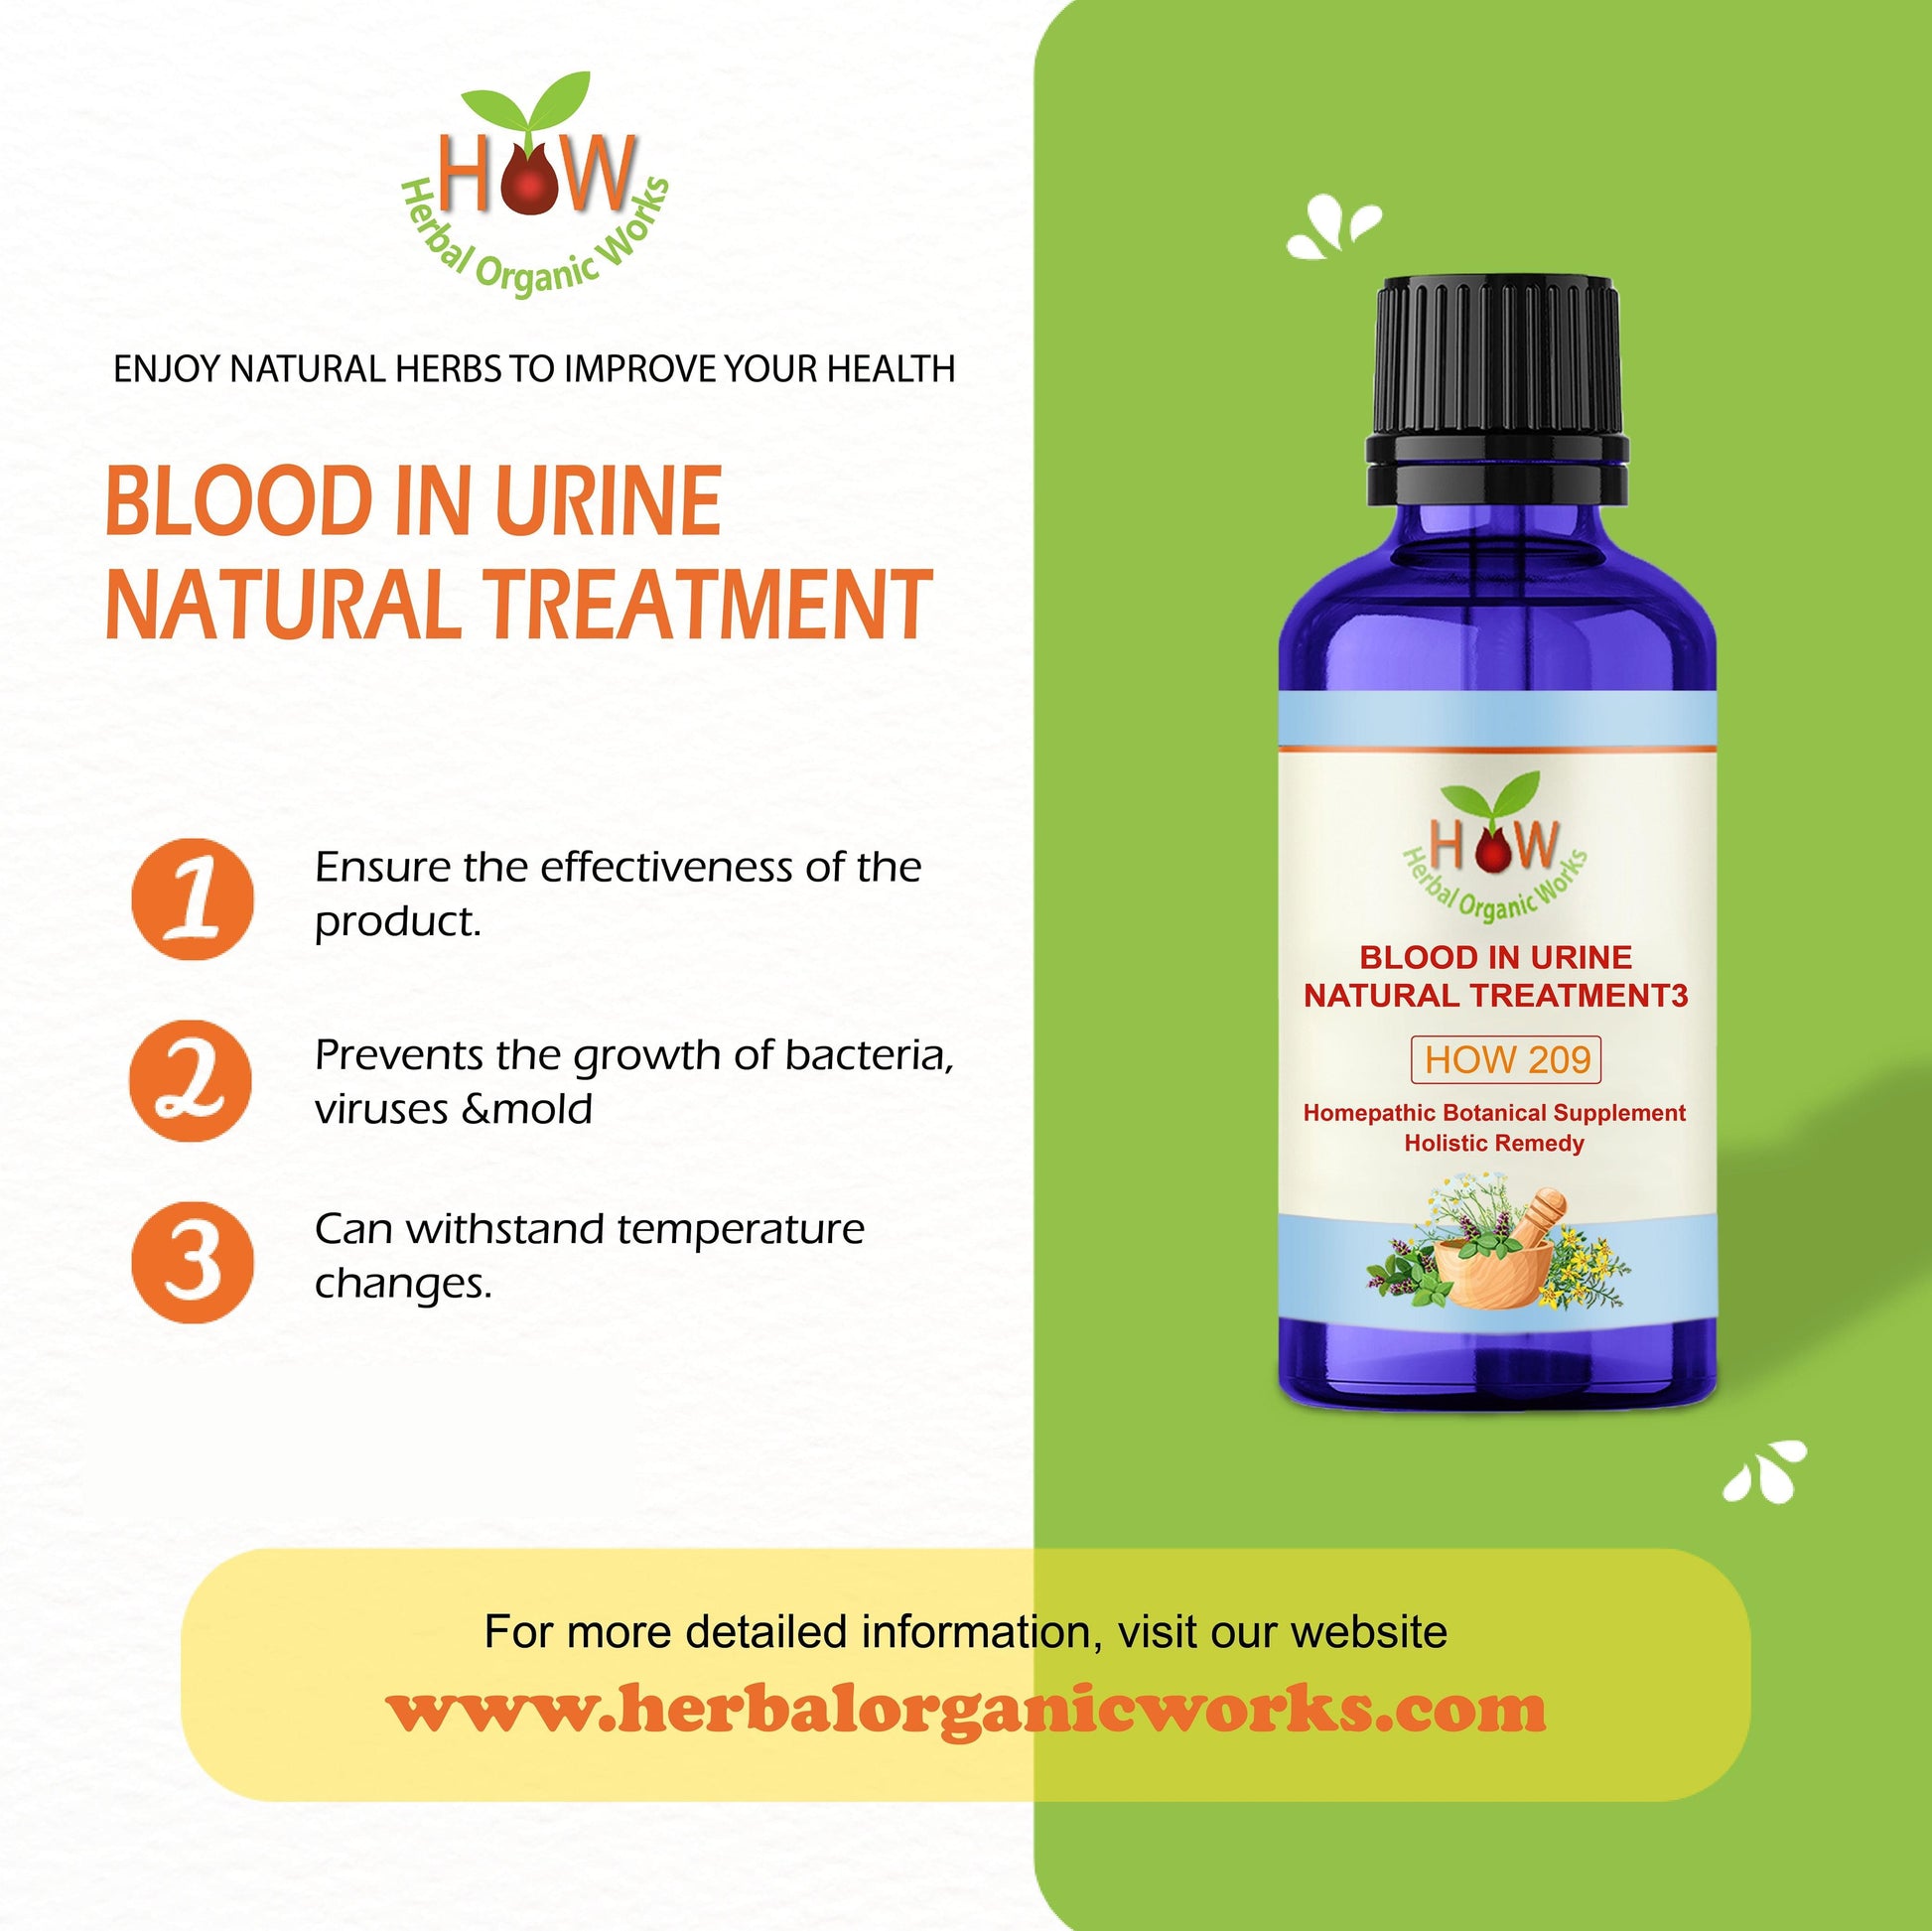 BLOOD IN URINE NATURAL TREATEMENT-(HOW209)